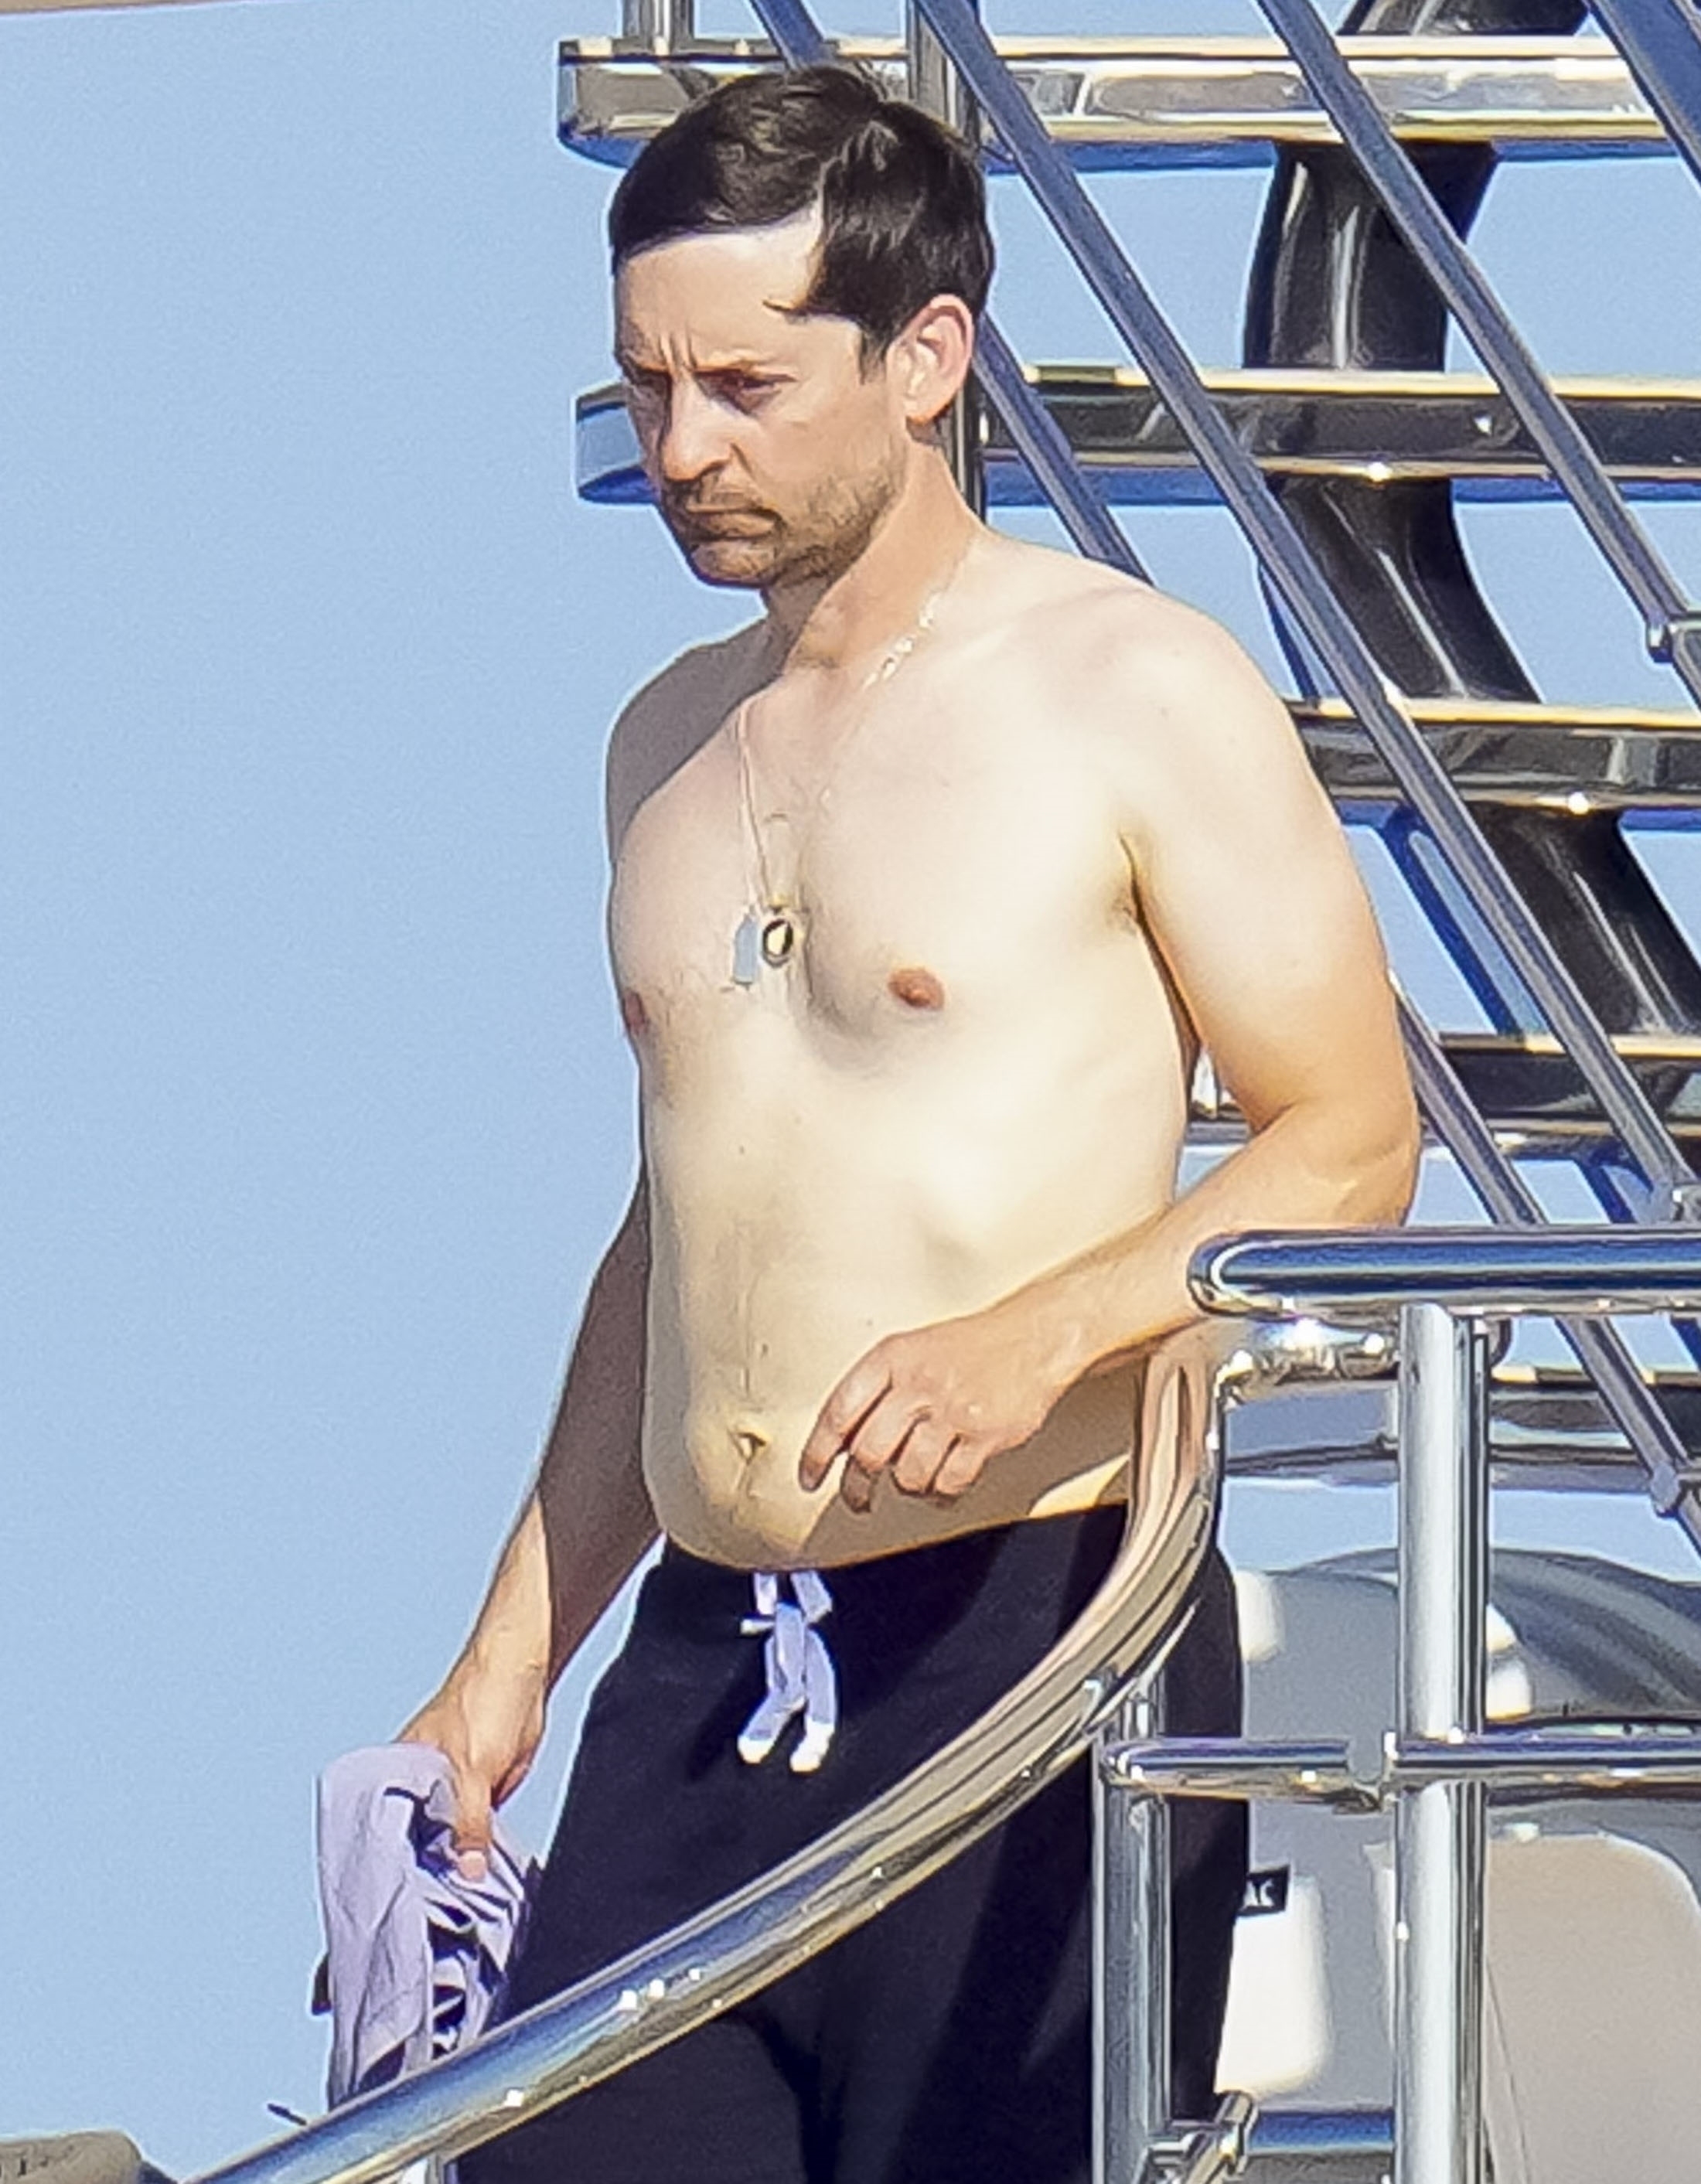 The actor soaked up the sun and enjoyed a snack while on the luxury vessel in St Tropez, France, at times appearing shirtless